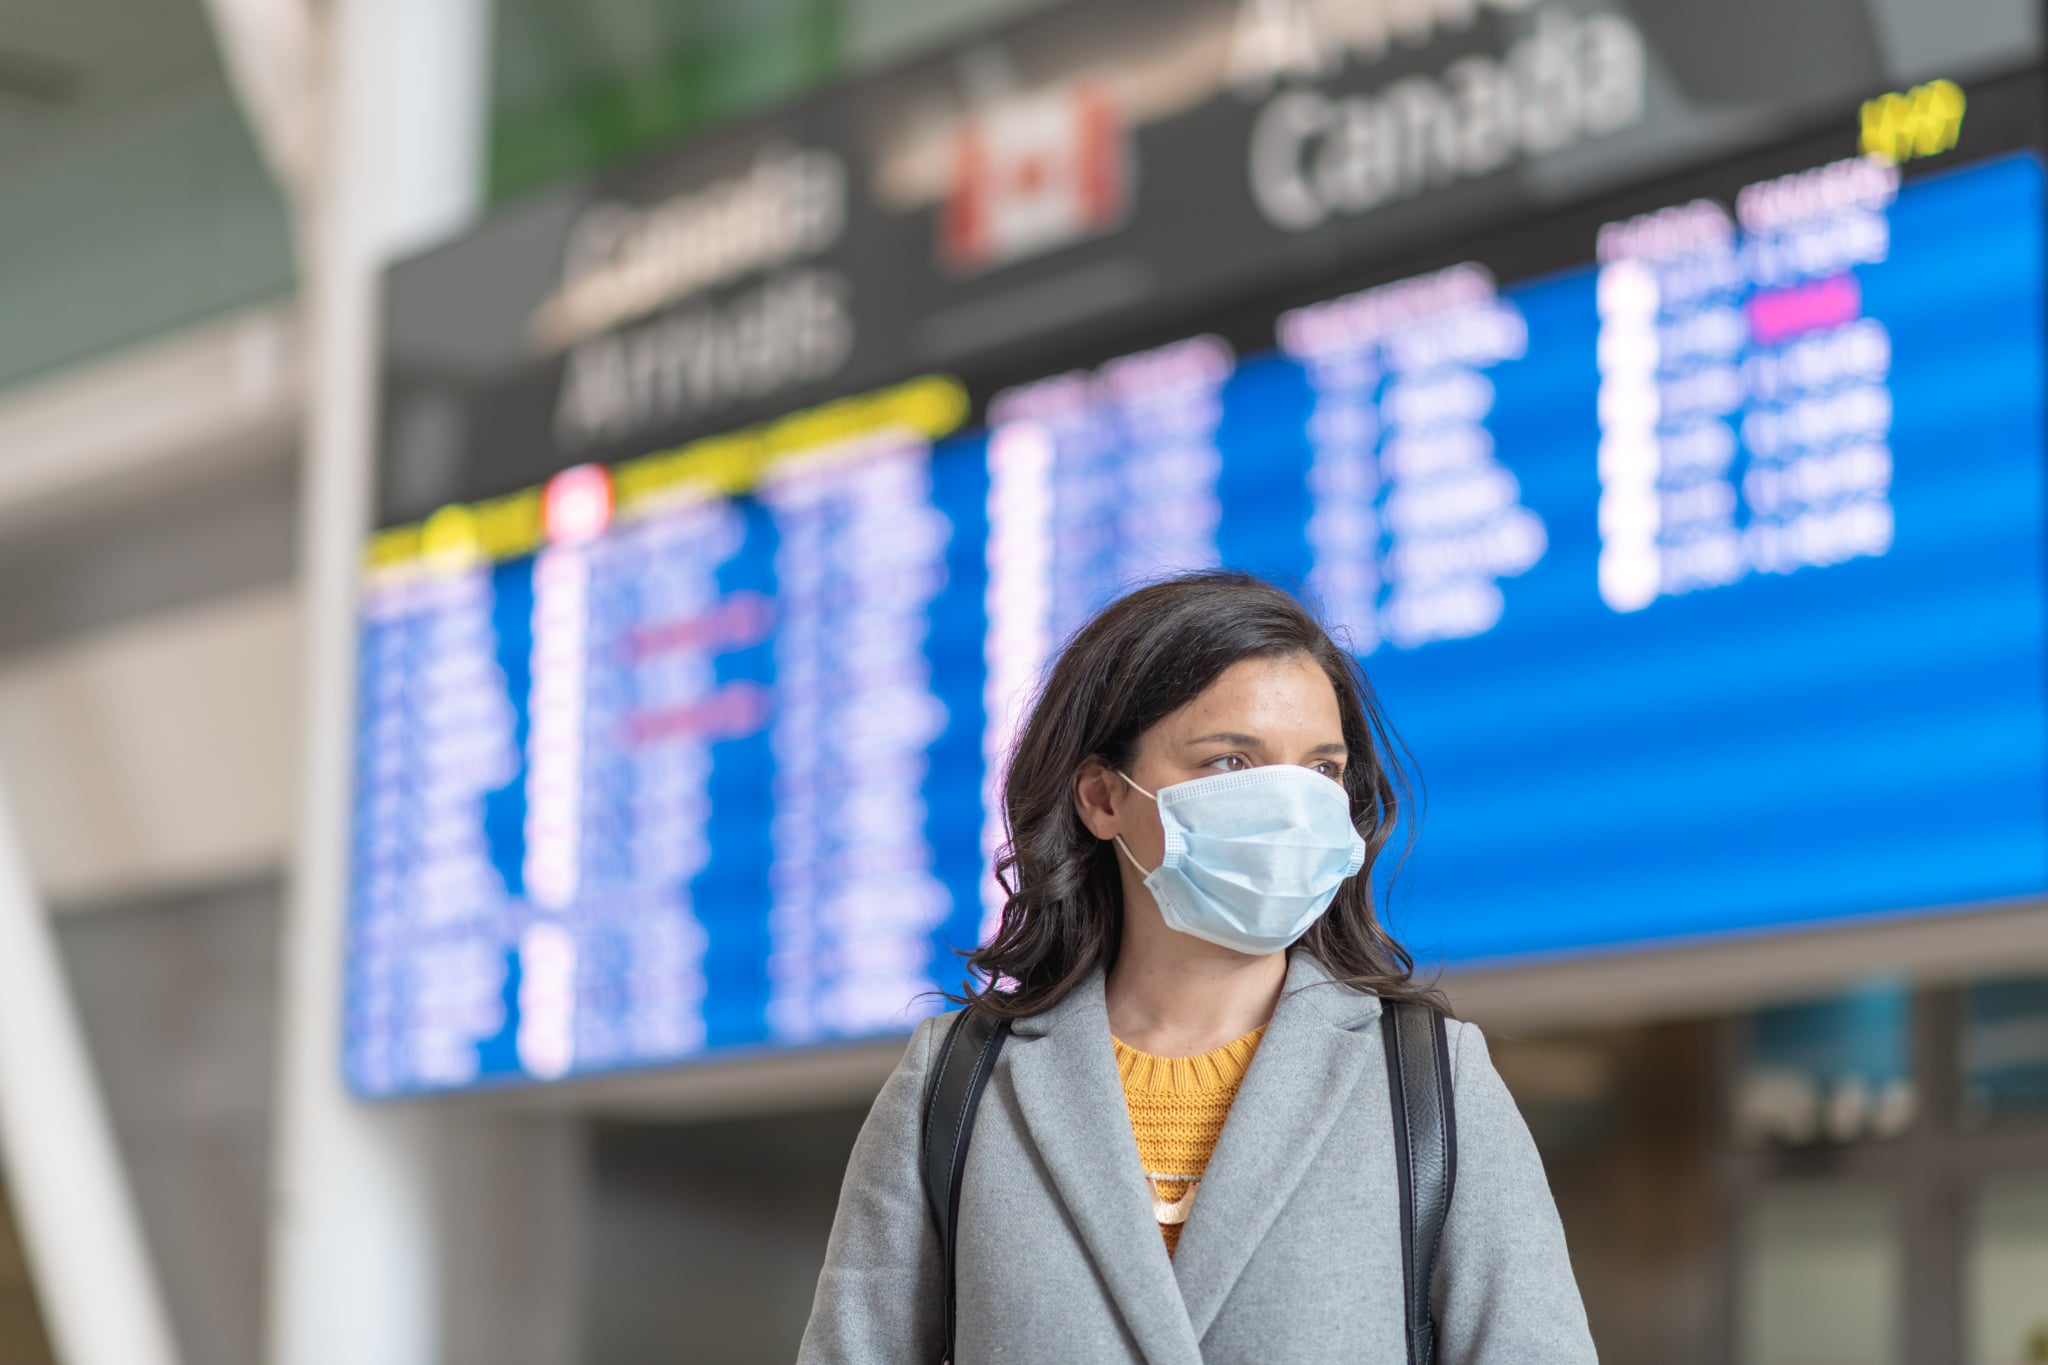 A solo travellers flight has been cancelled. She is standing in front of the departures board. She is wearing a protective face mask. Travelling during the COVID-19 pandemic.